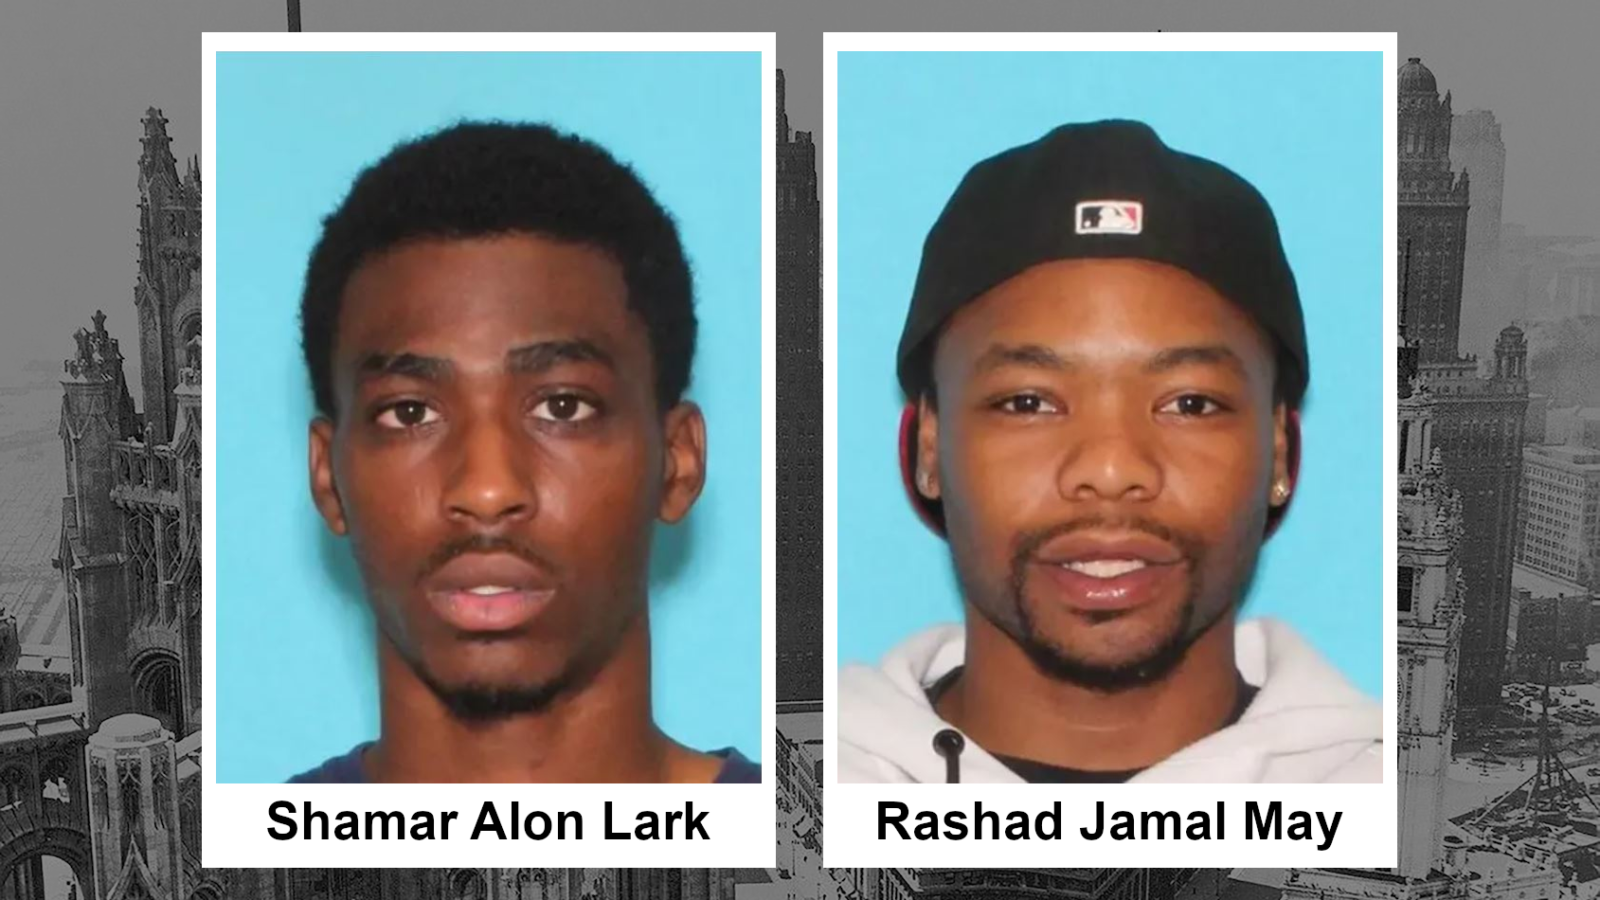 Who Are Rashad Jamal May and Shamar Alon Lark? Arrested are suspects in